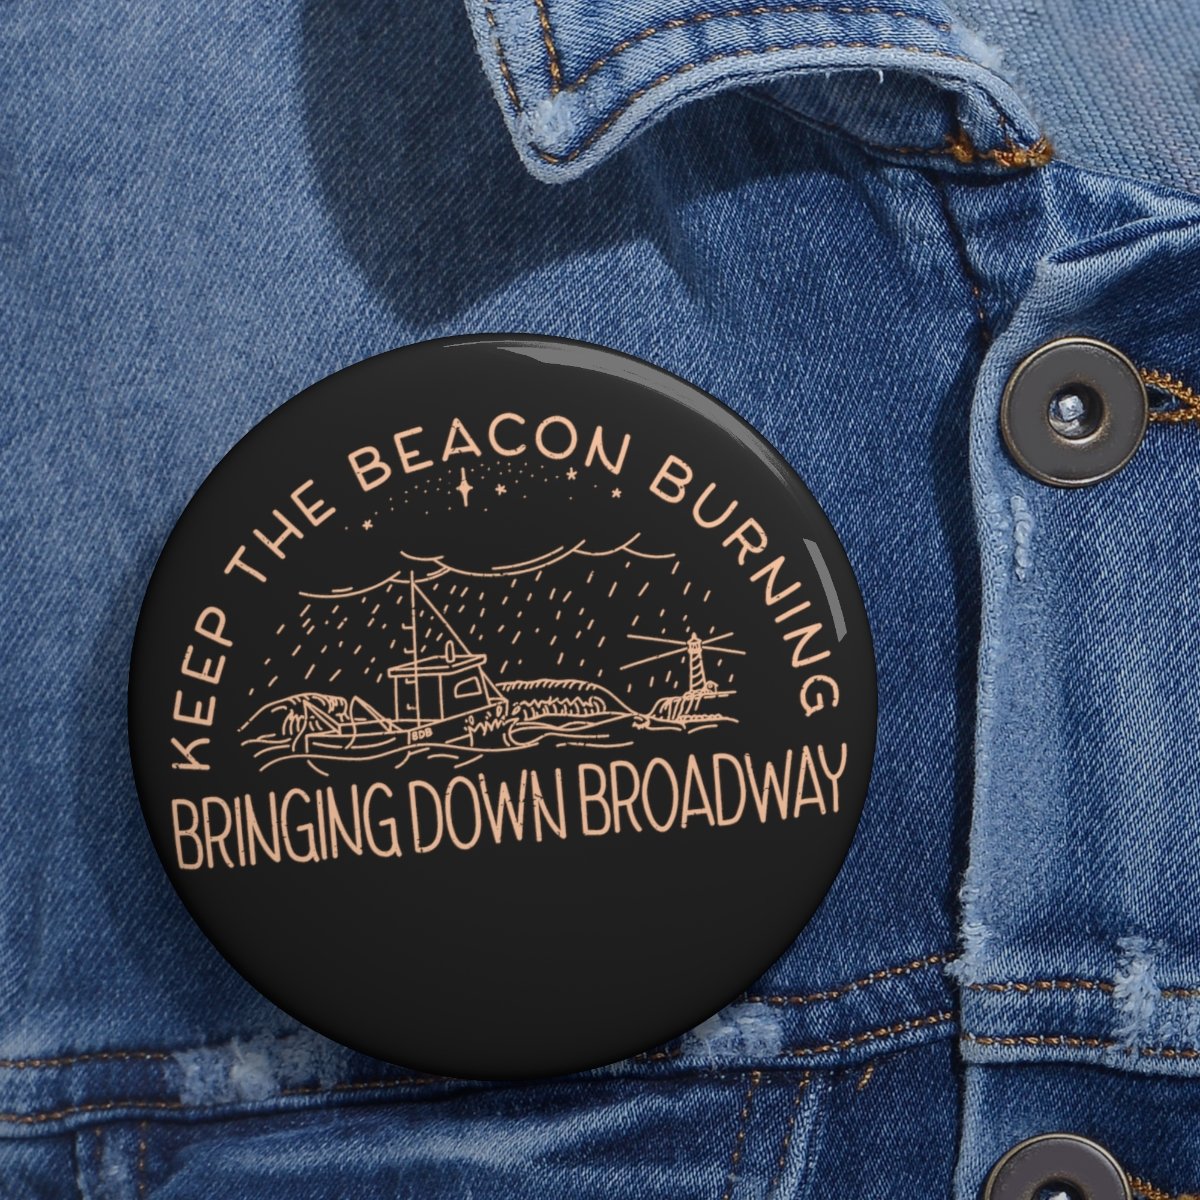 Bringing Down Broadway – Beacon Pin Buttons